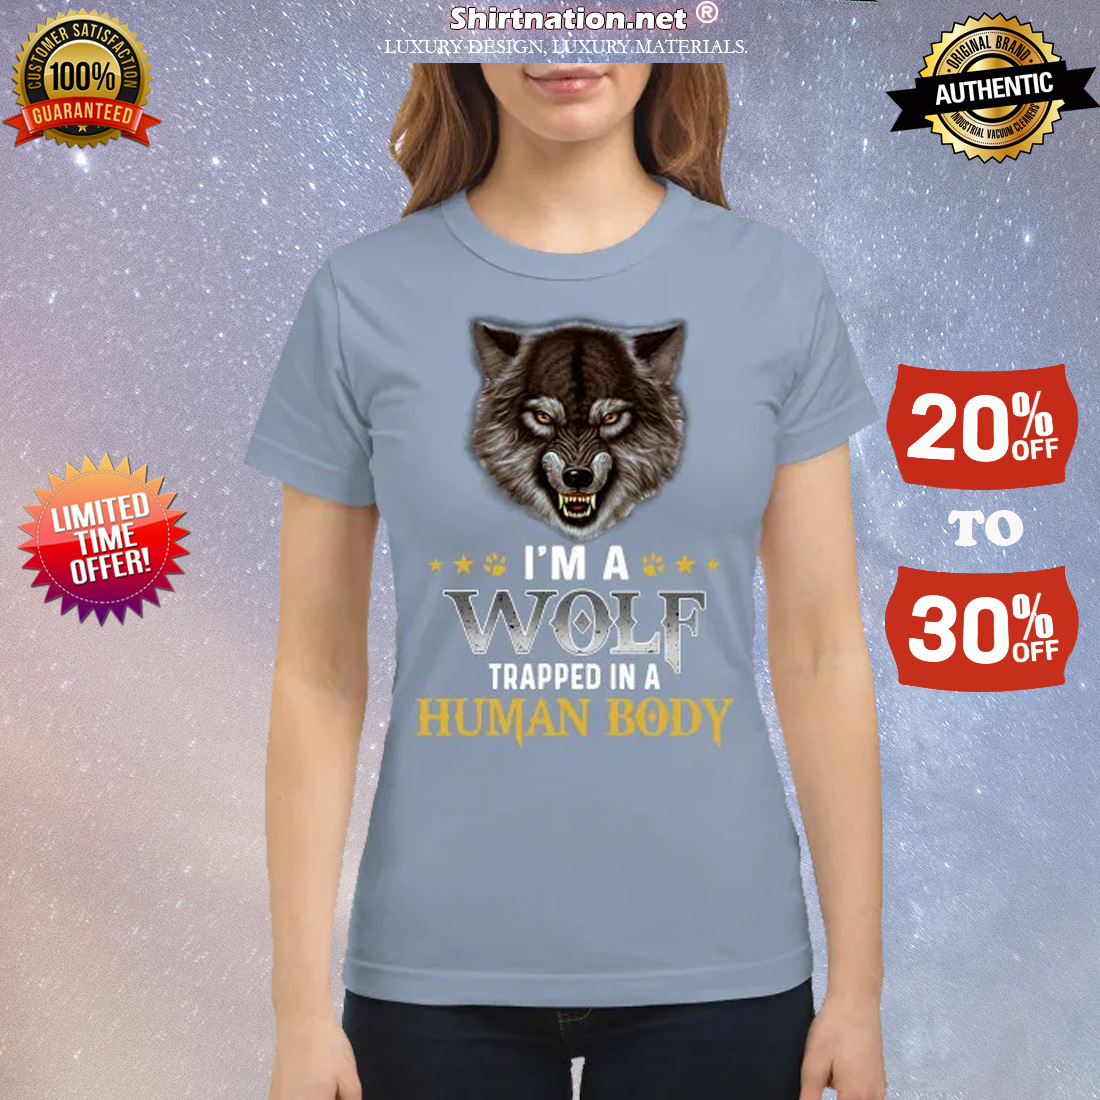 I'm a wolf trapped in a human body classic shirt